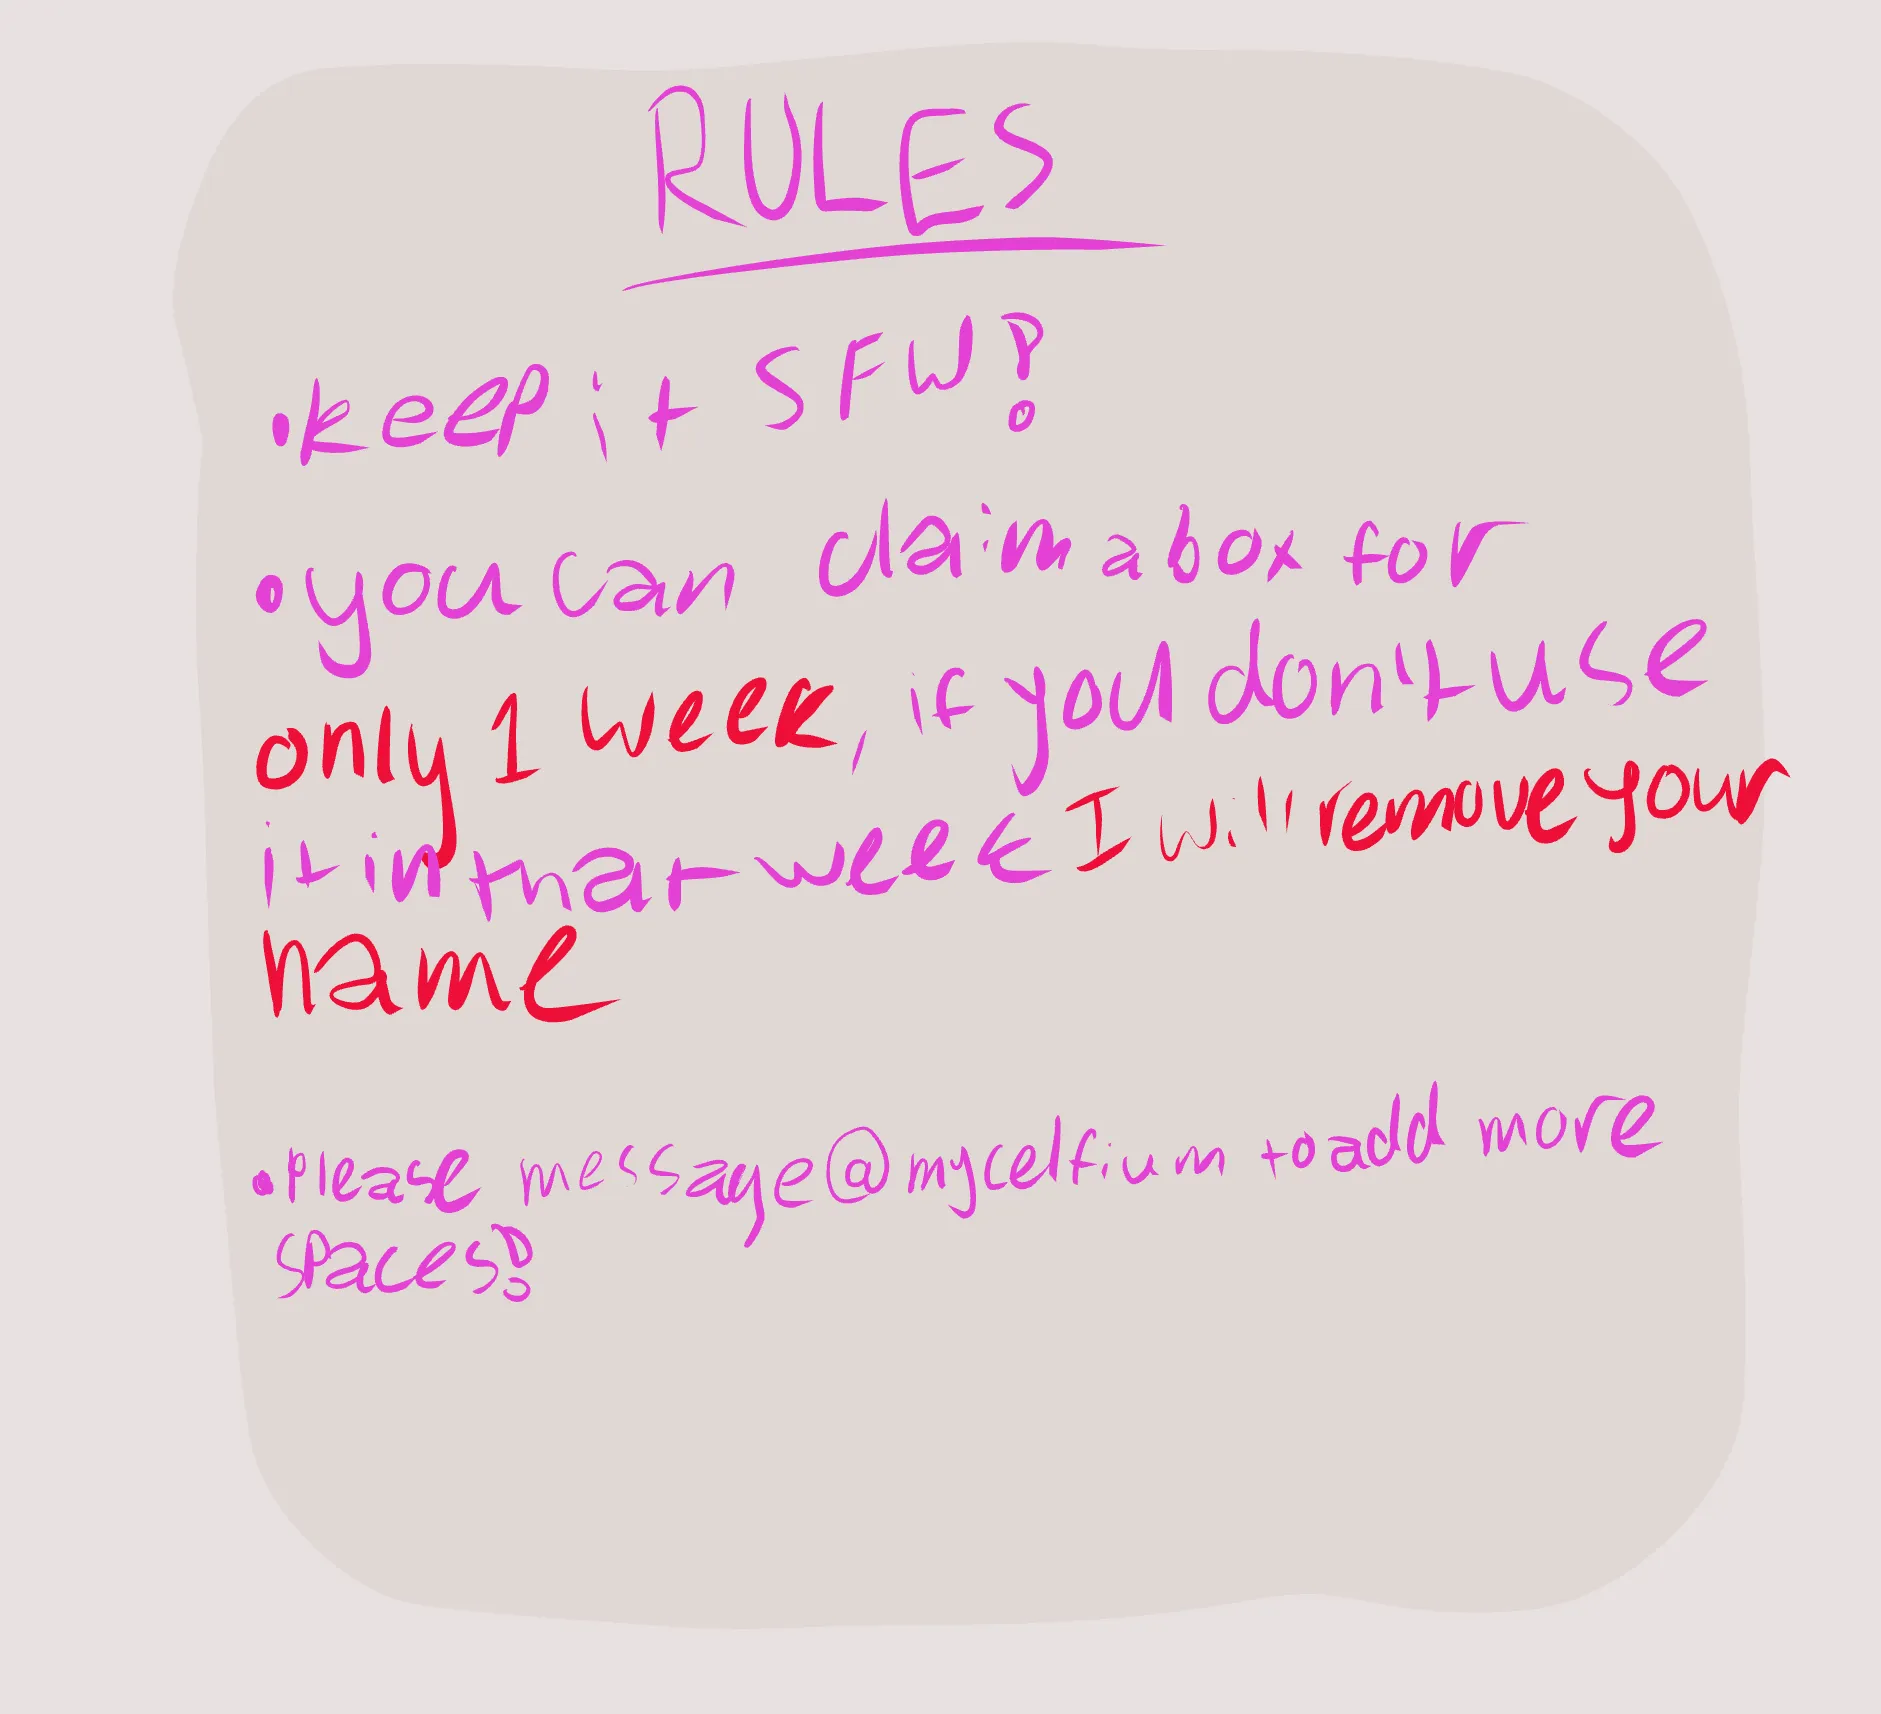 Rules for a new thingy!